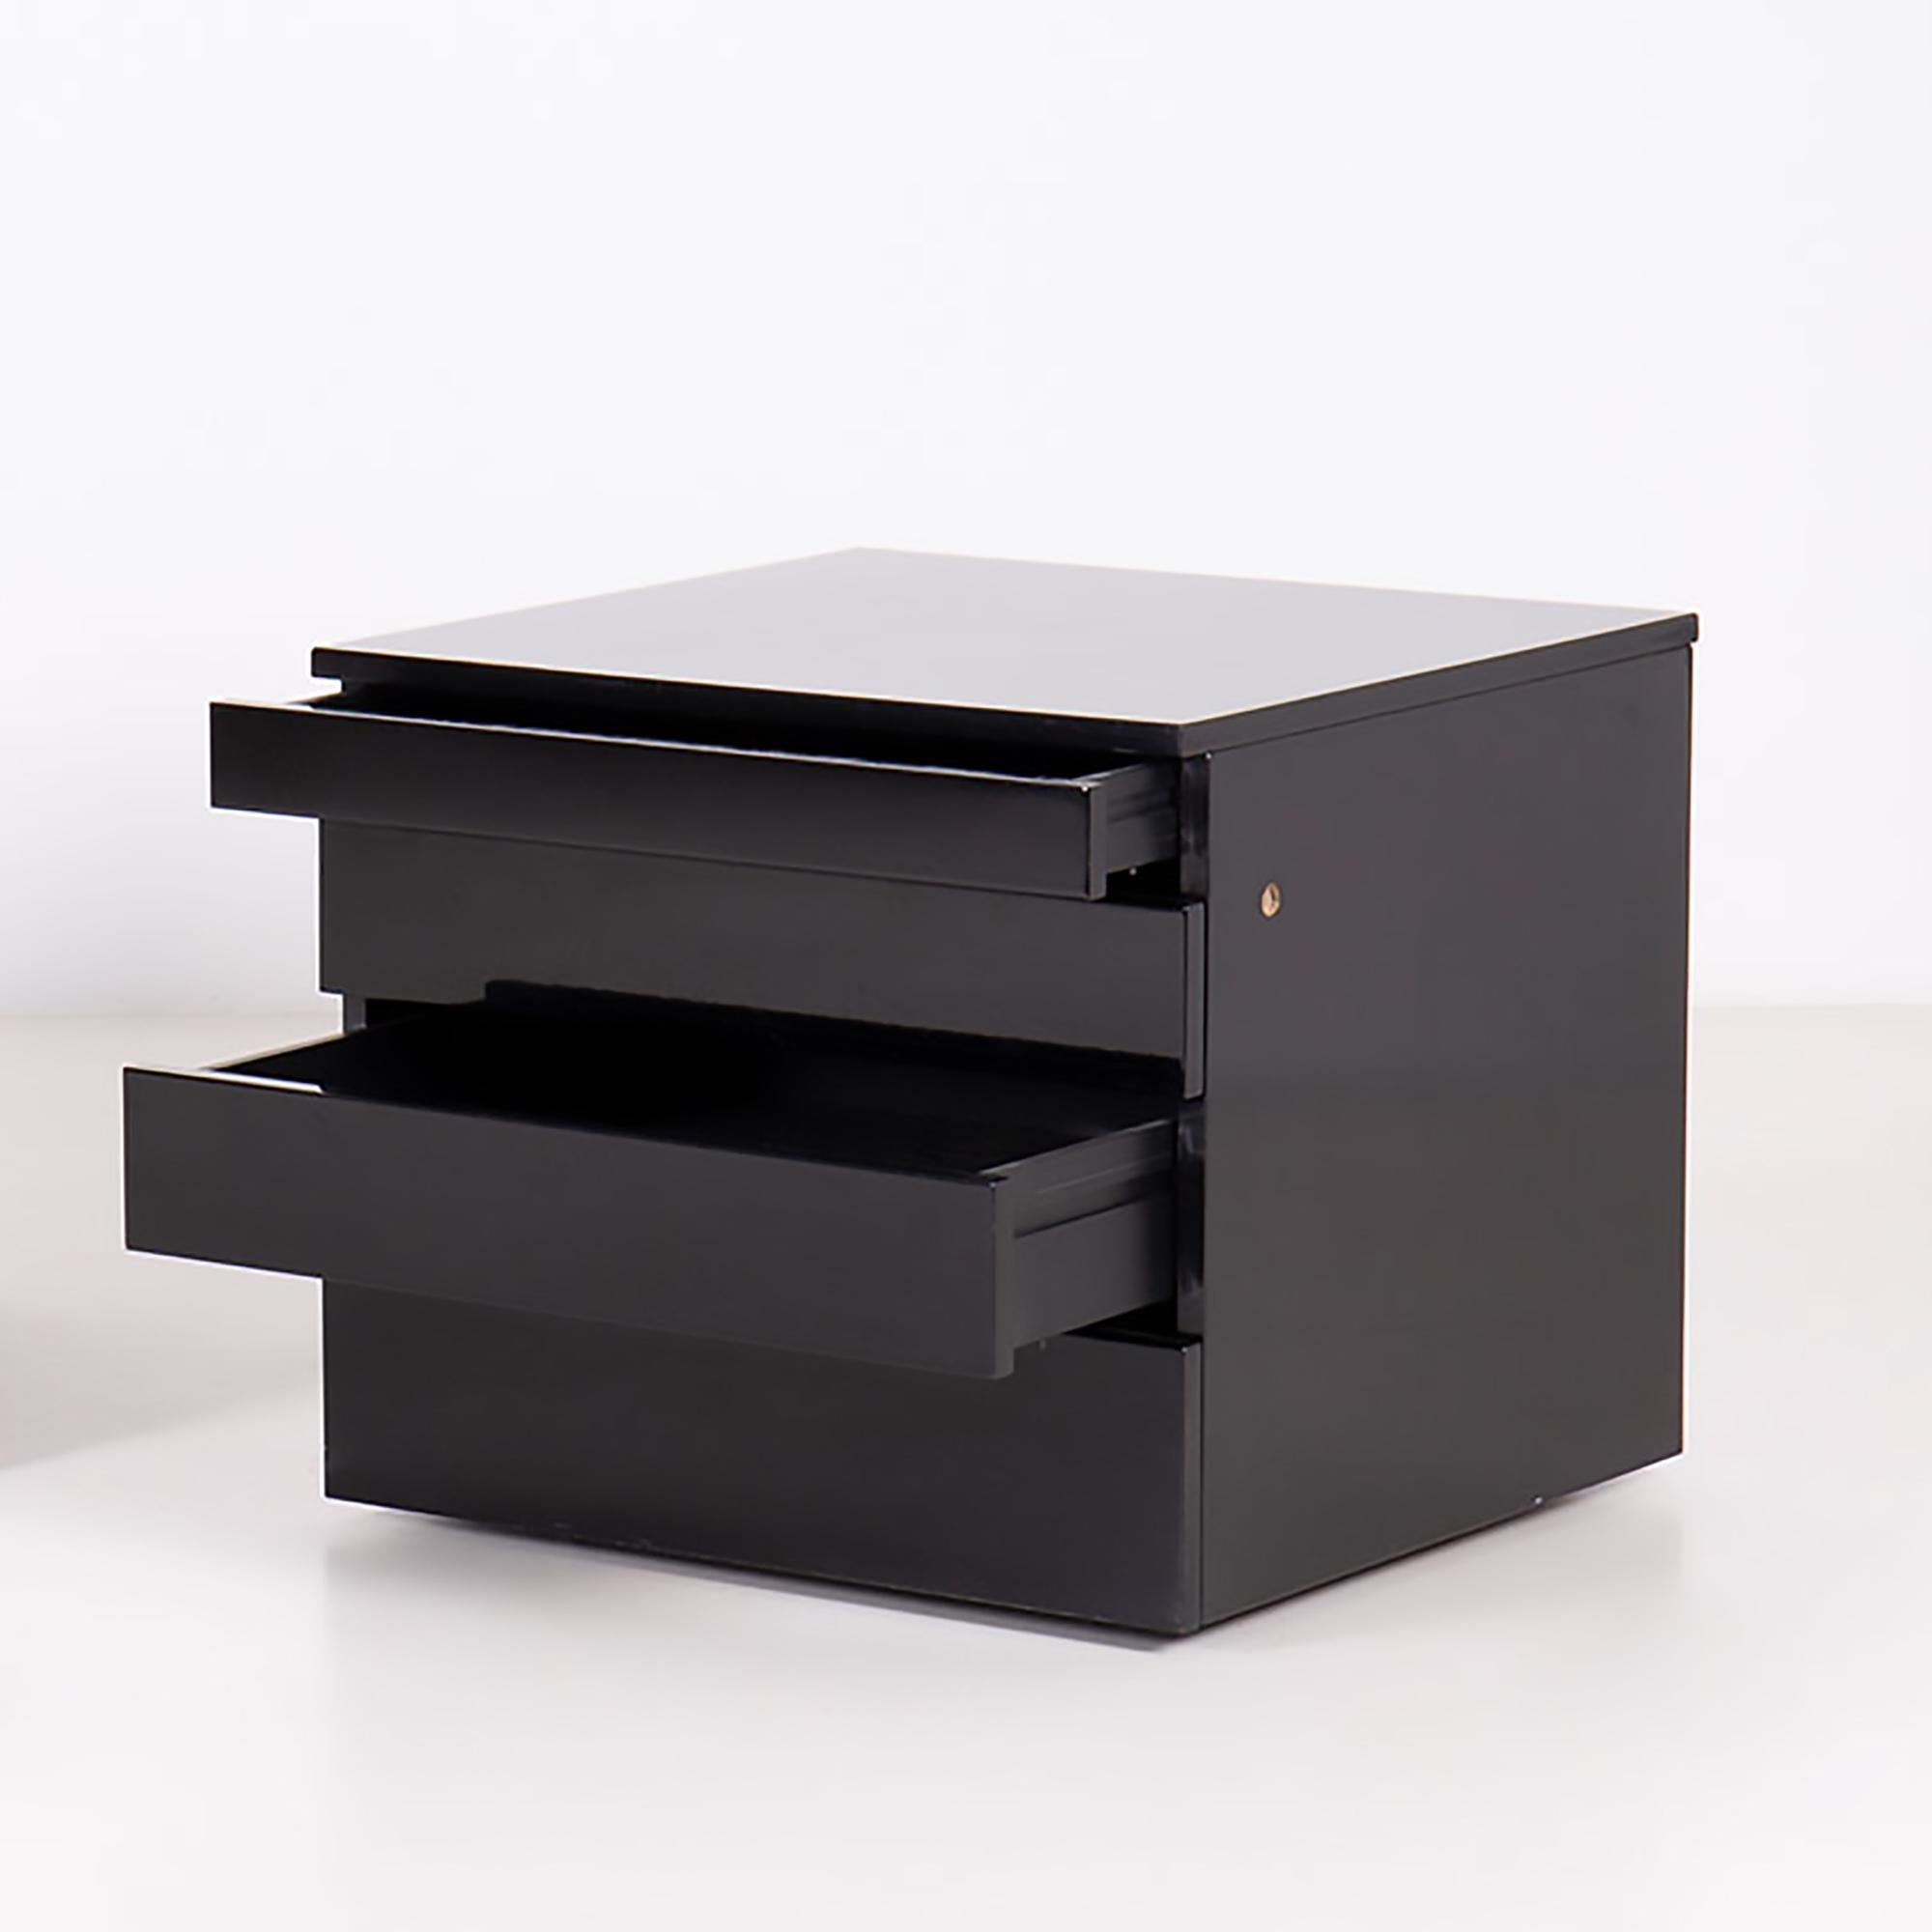 Orseolo chest of drawers by Studio Simon with wheels. Structure, top and drawers in polyester varnished wood and glossy black finish.
Four drawers of different sizes, the first with a yale-type lock with key.